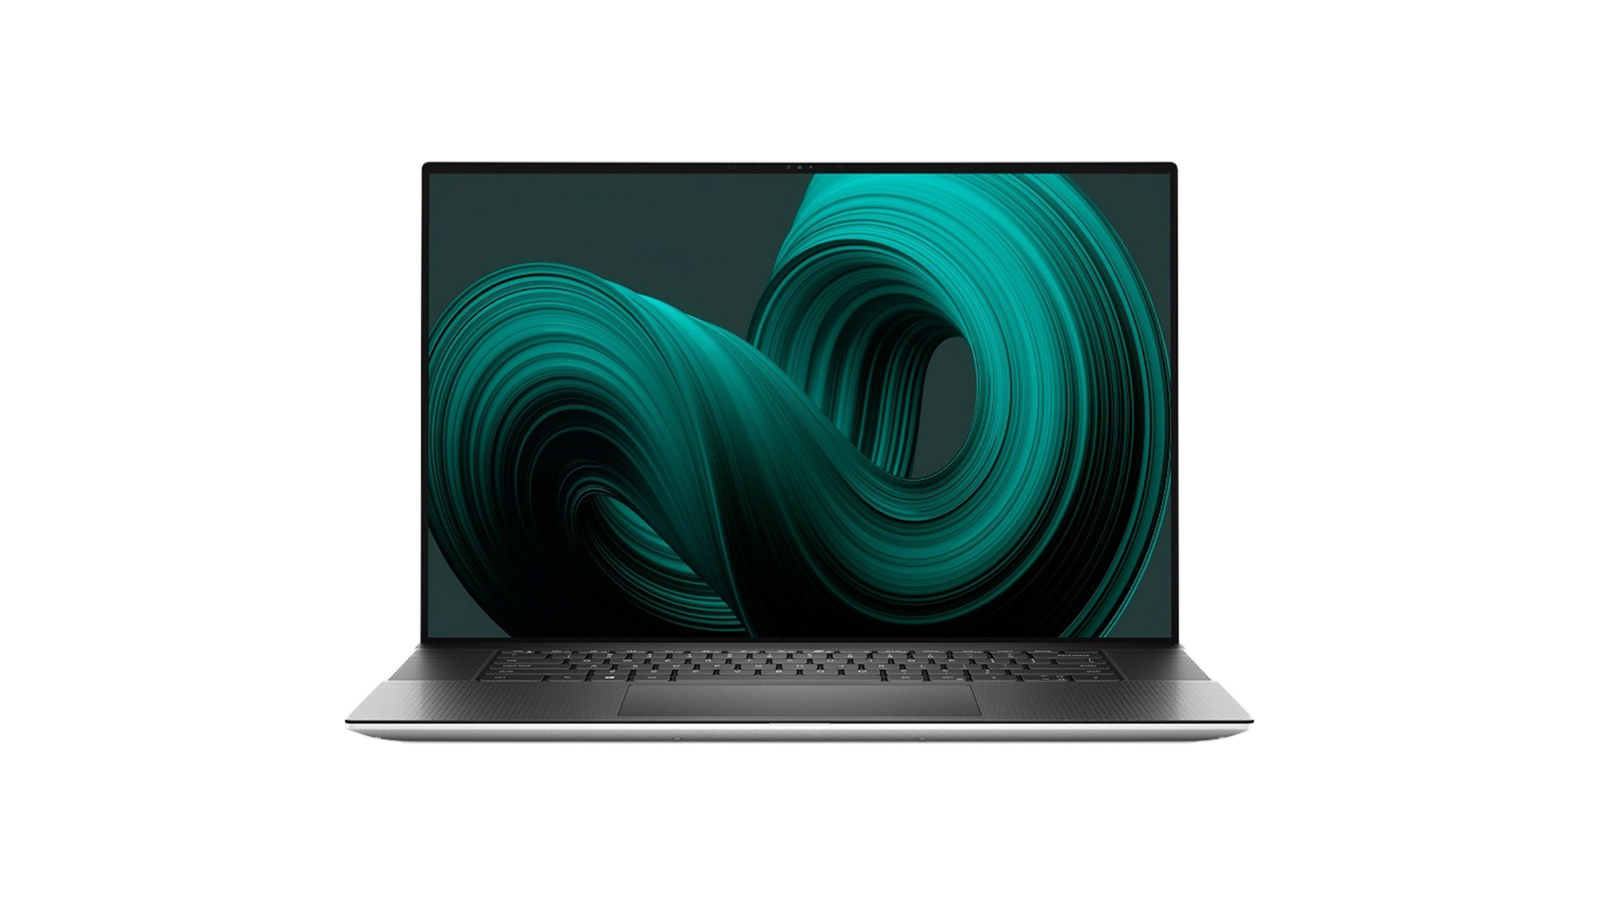 Dell XPS 17 9710 - The best Windows laptop overall